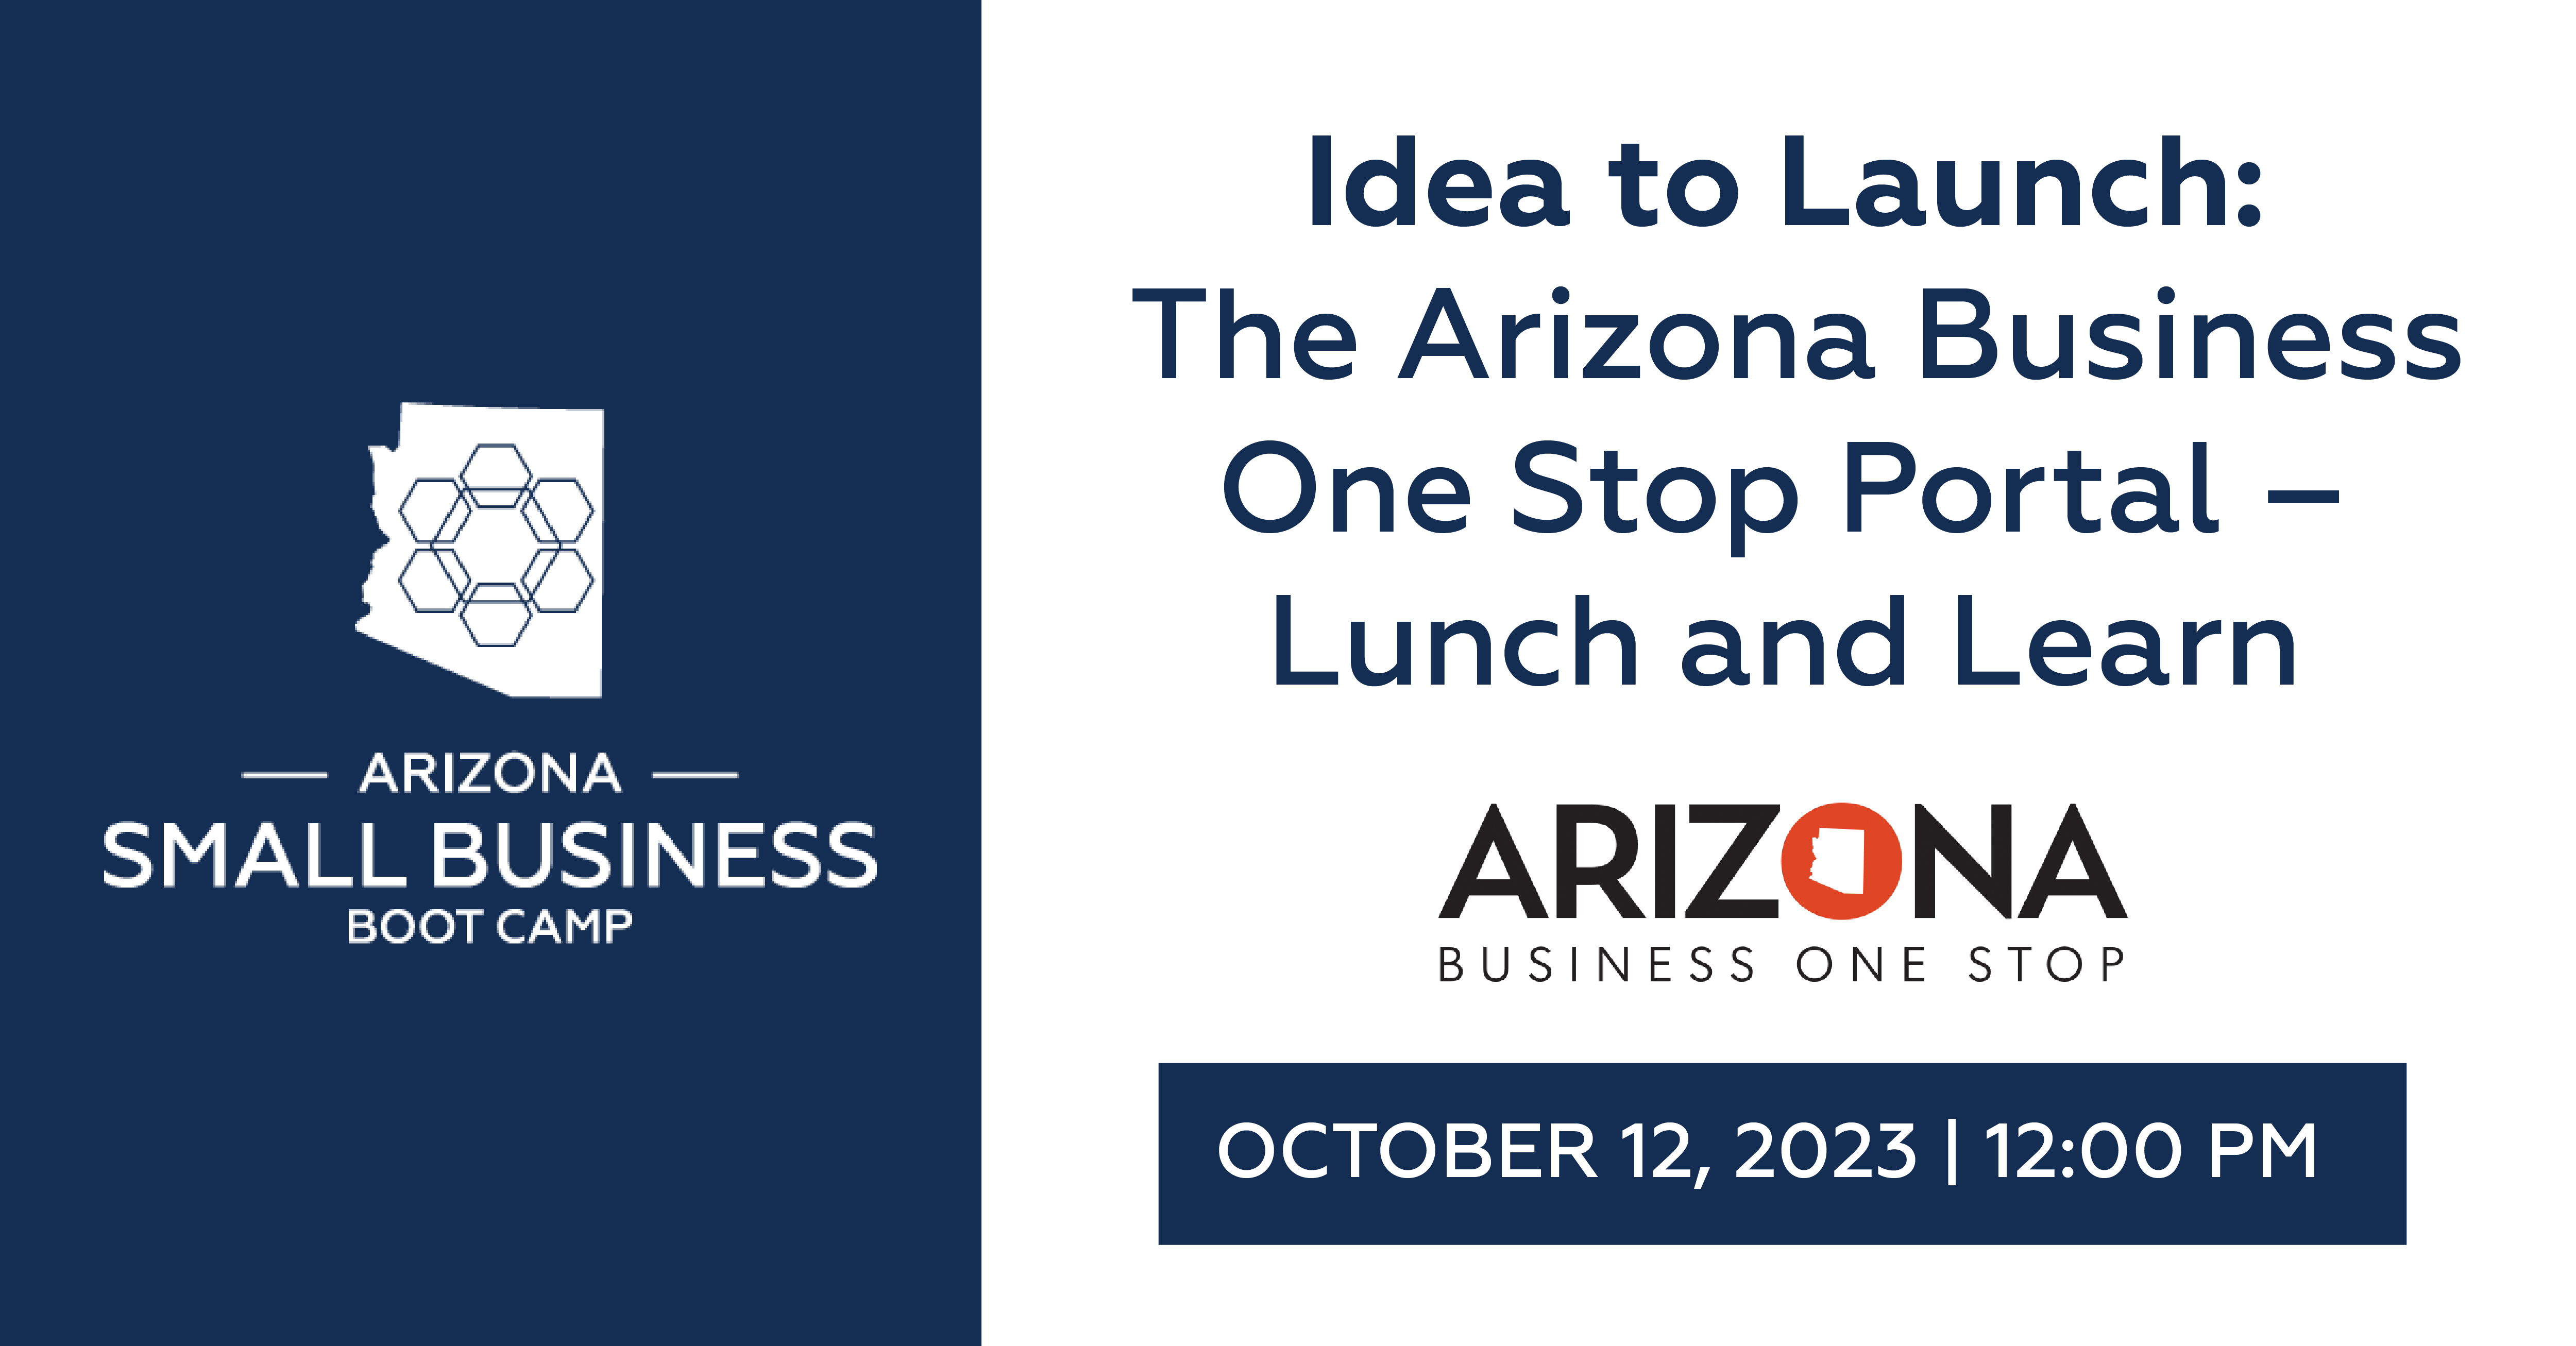 Idea to Launch: The Arizona Business One Stop Portal  – Lunch and Learn 